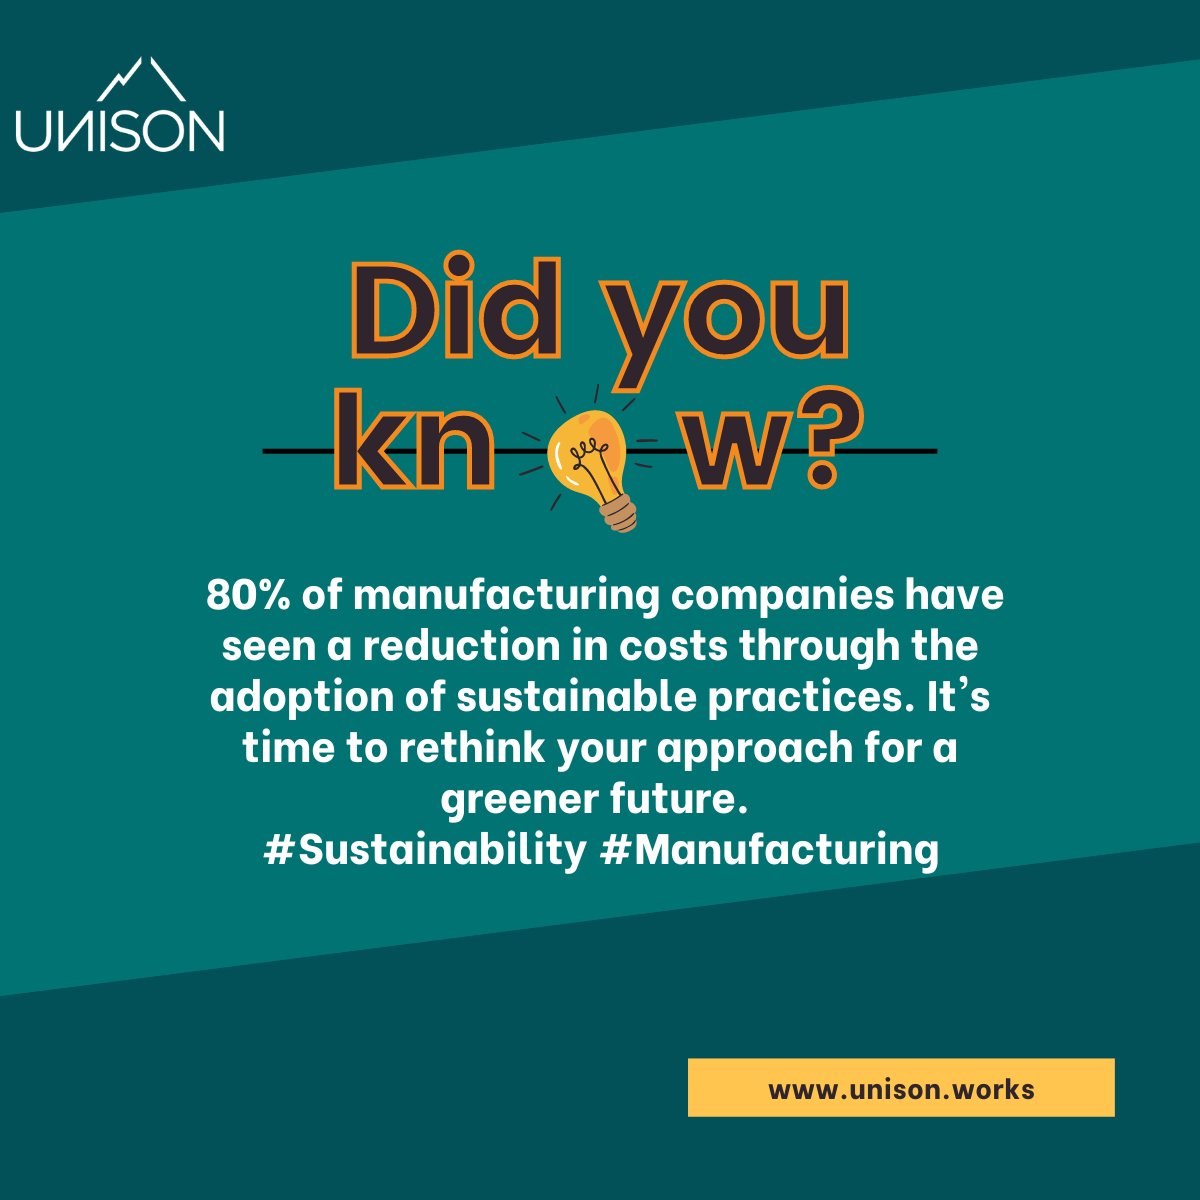 Did you know that 80% of manufacturing companies have seen a reduction in costs through the adoption of sustainable practices? It's time to rethink your approach to a greener future. #GreenManufacturing #EcoFriendlySolutions #EcoManufacturing #CostReduction